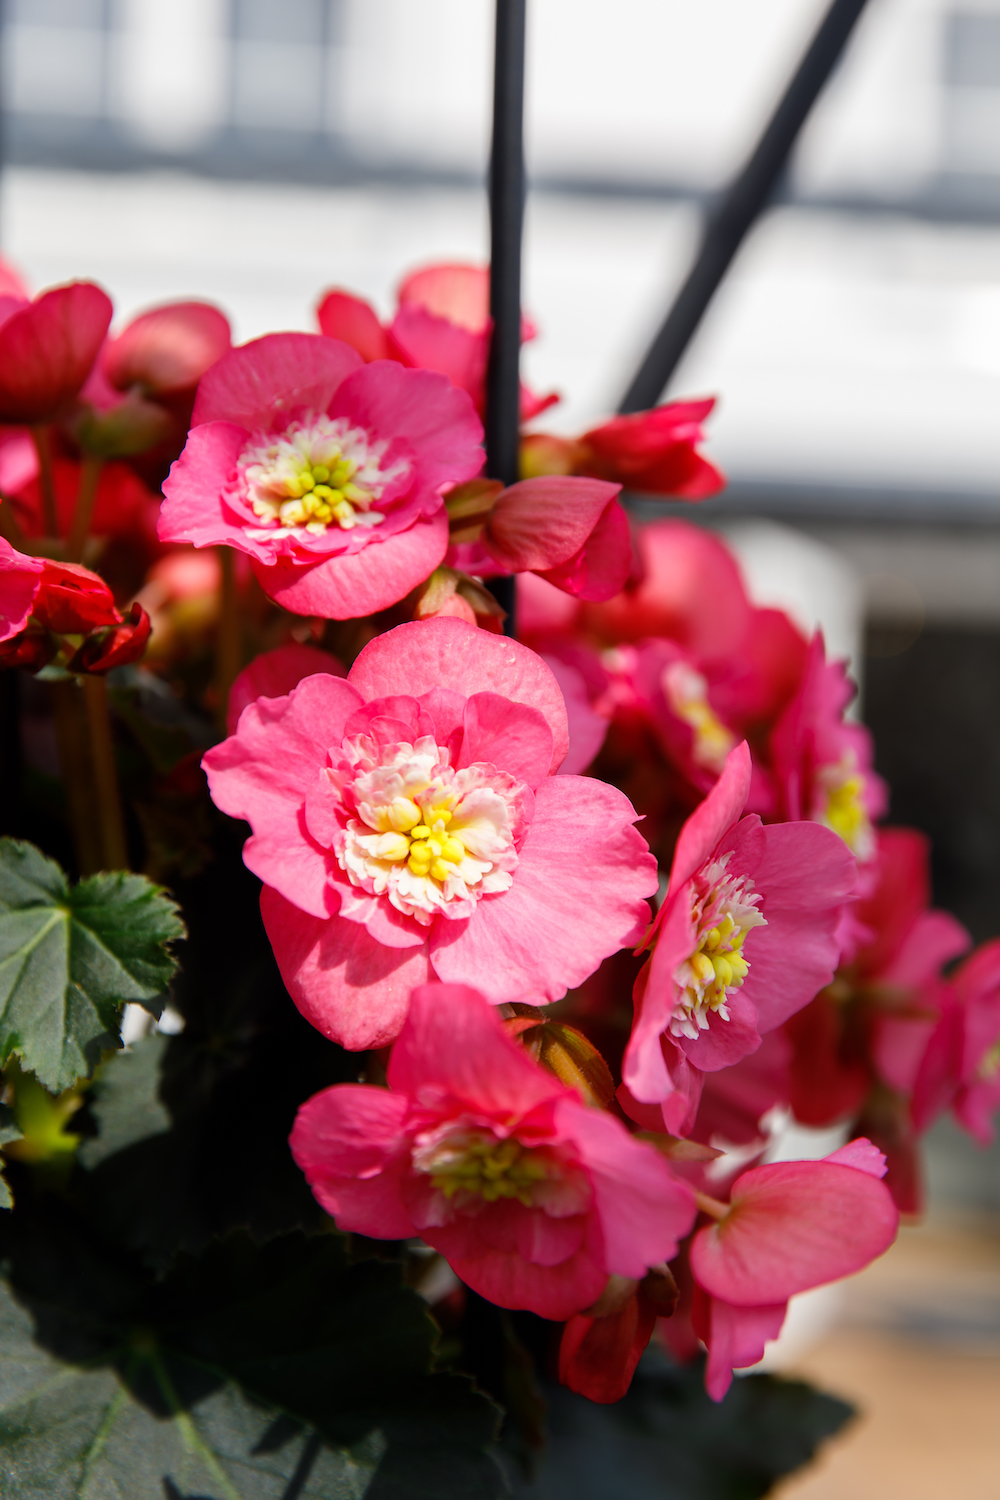 Begonia plants for mother's day - on Thursd